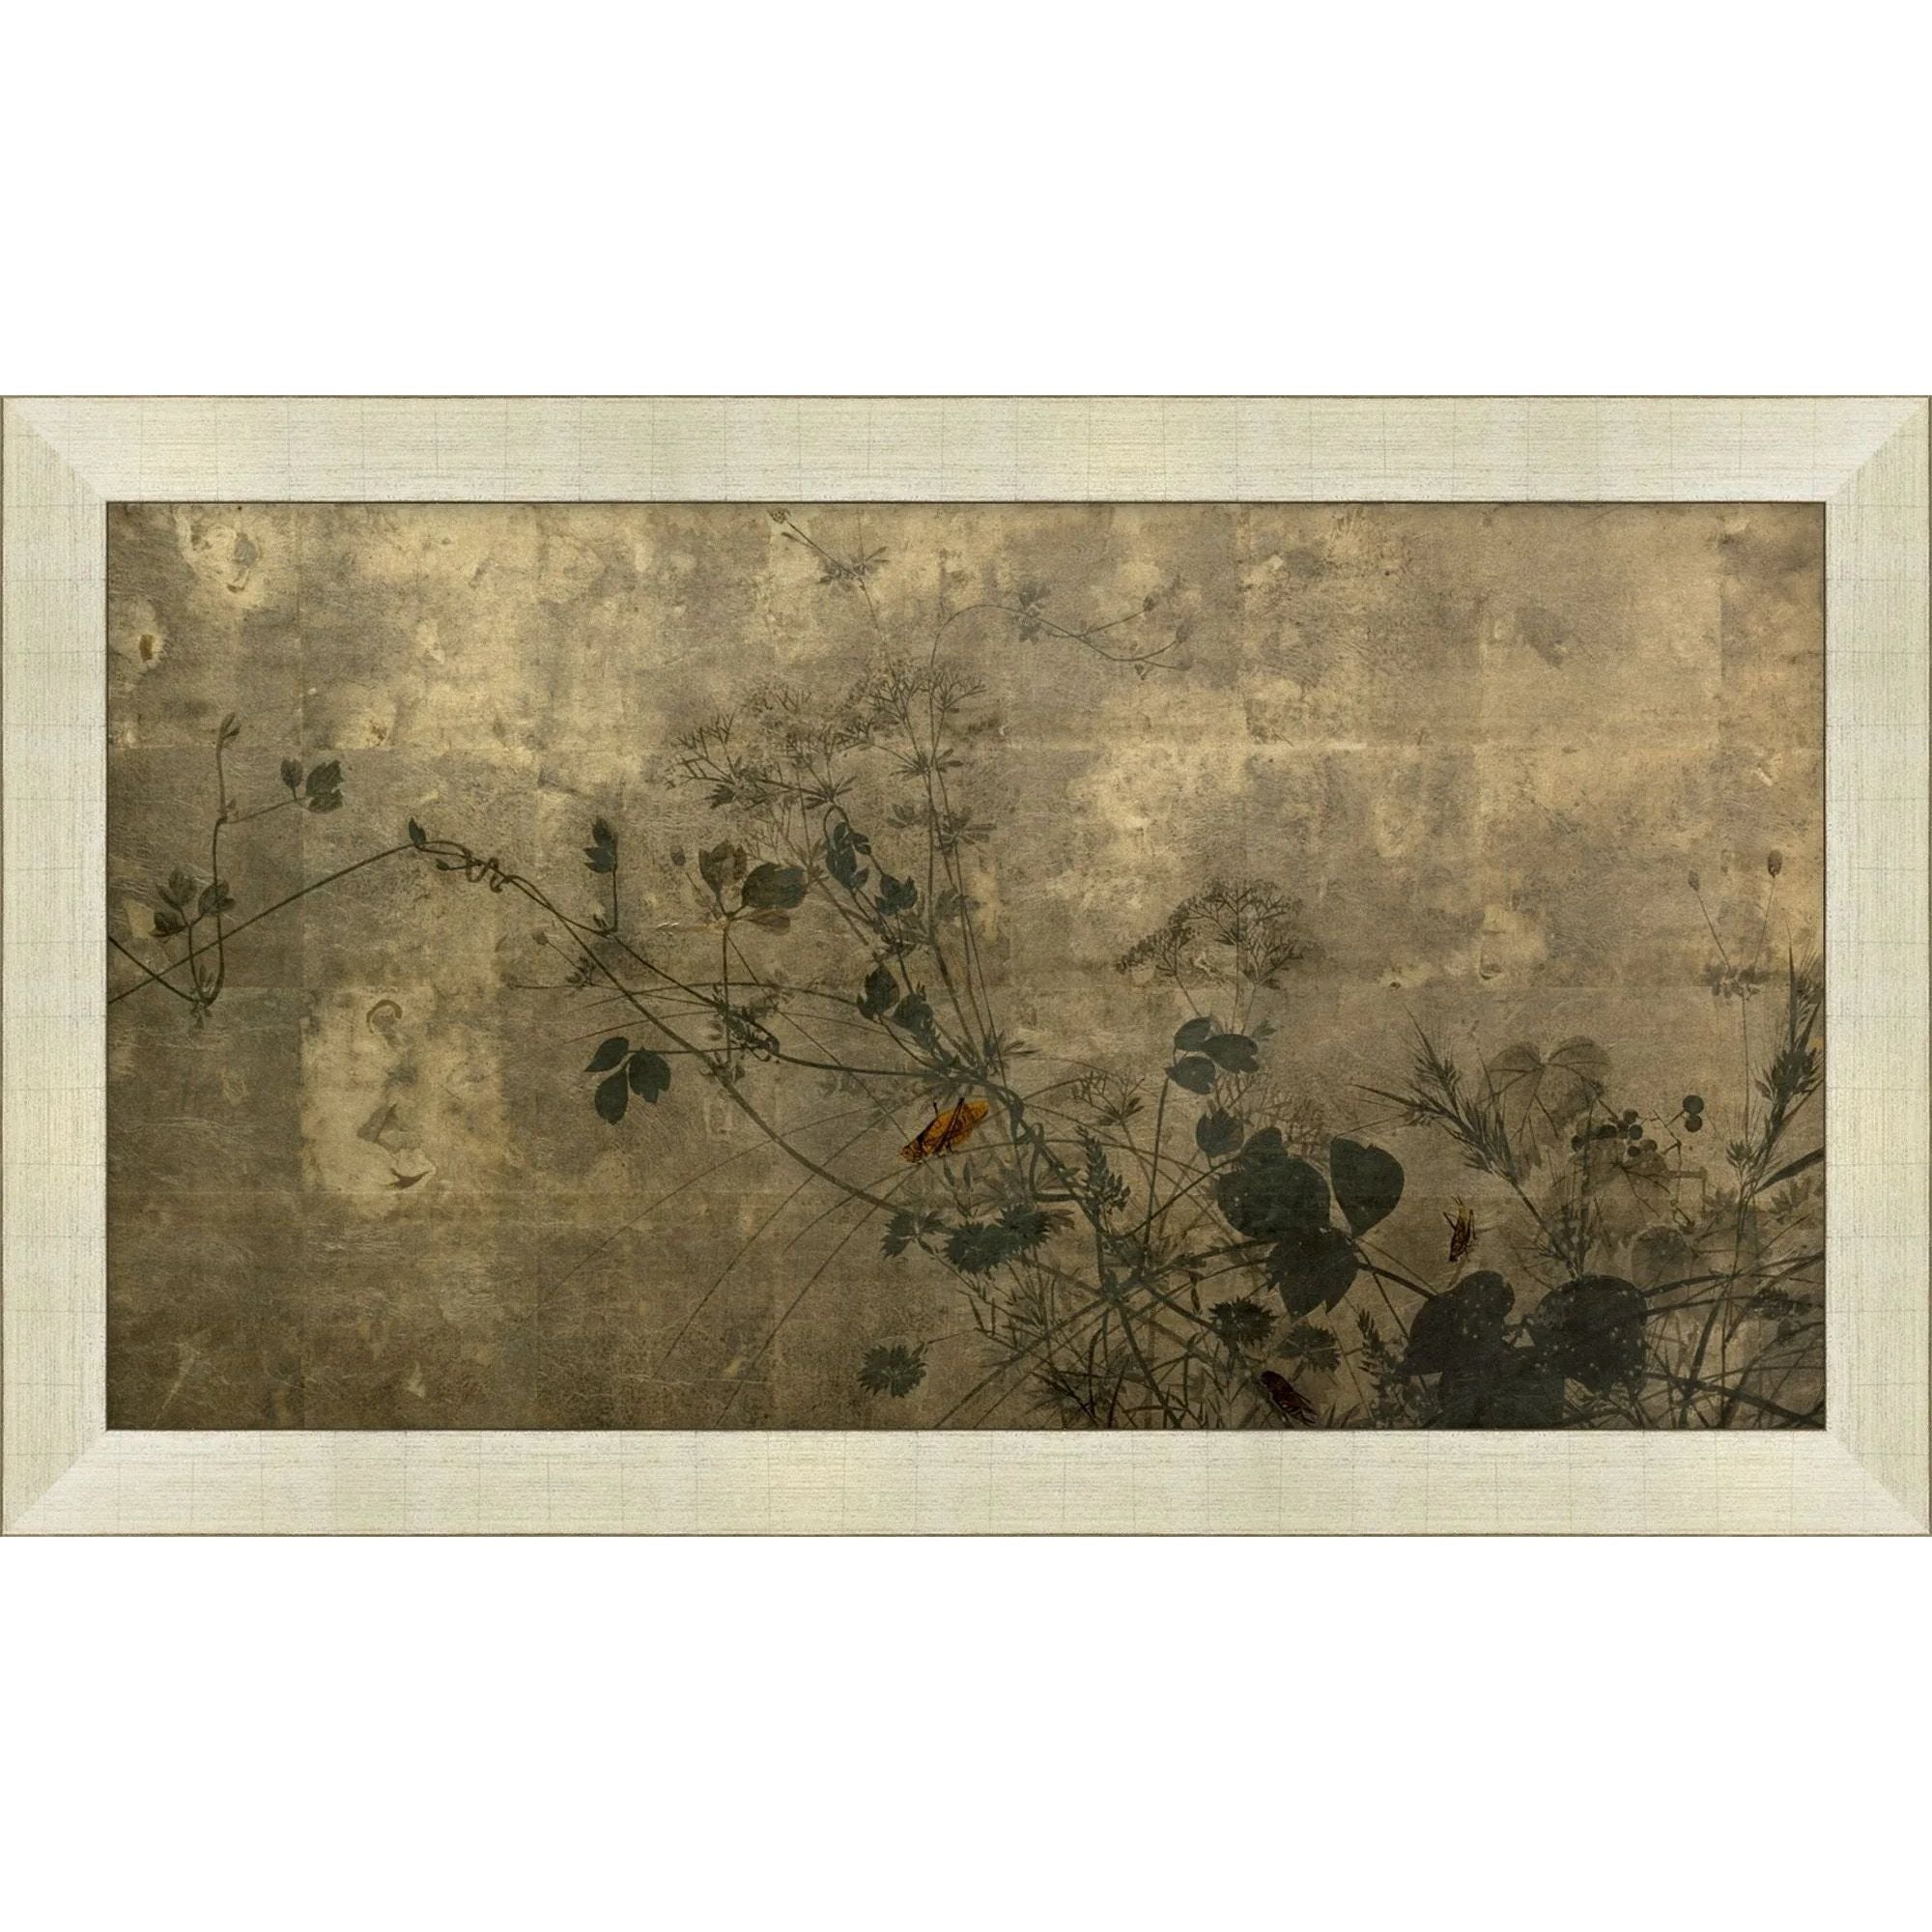 Specialty:  Giclee on Silver Leafed Paper, Straight Fit (No Mats), Hand Applied Silver Leafin Amethyst Home provides interior design, new home construction design consulting, vintage area rugs, and lighting in the Kansas City metro area.